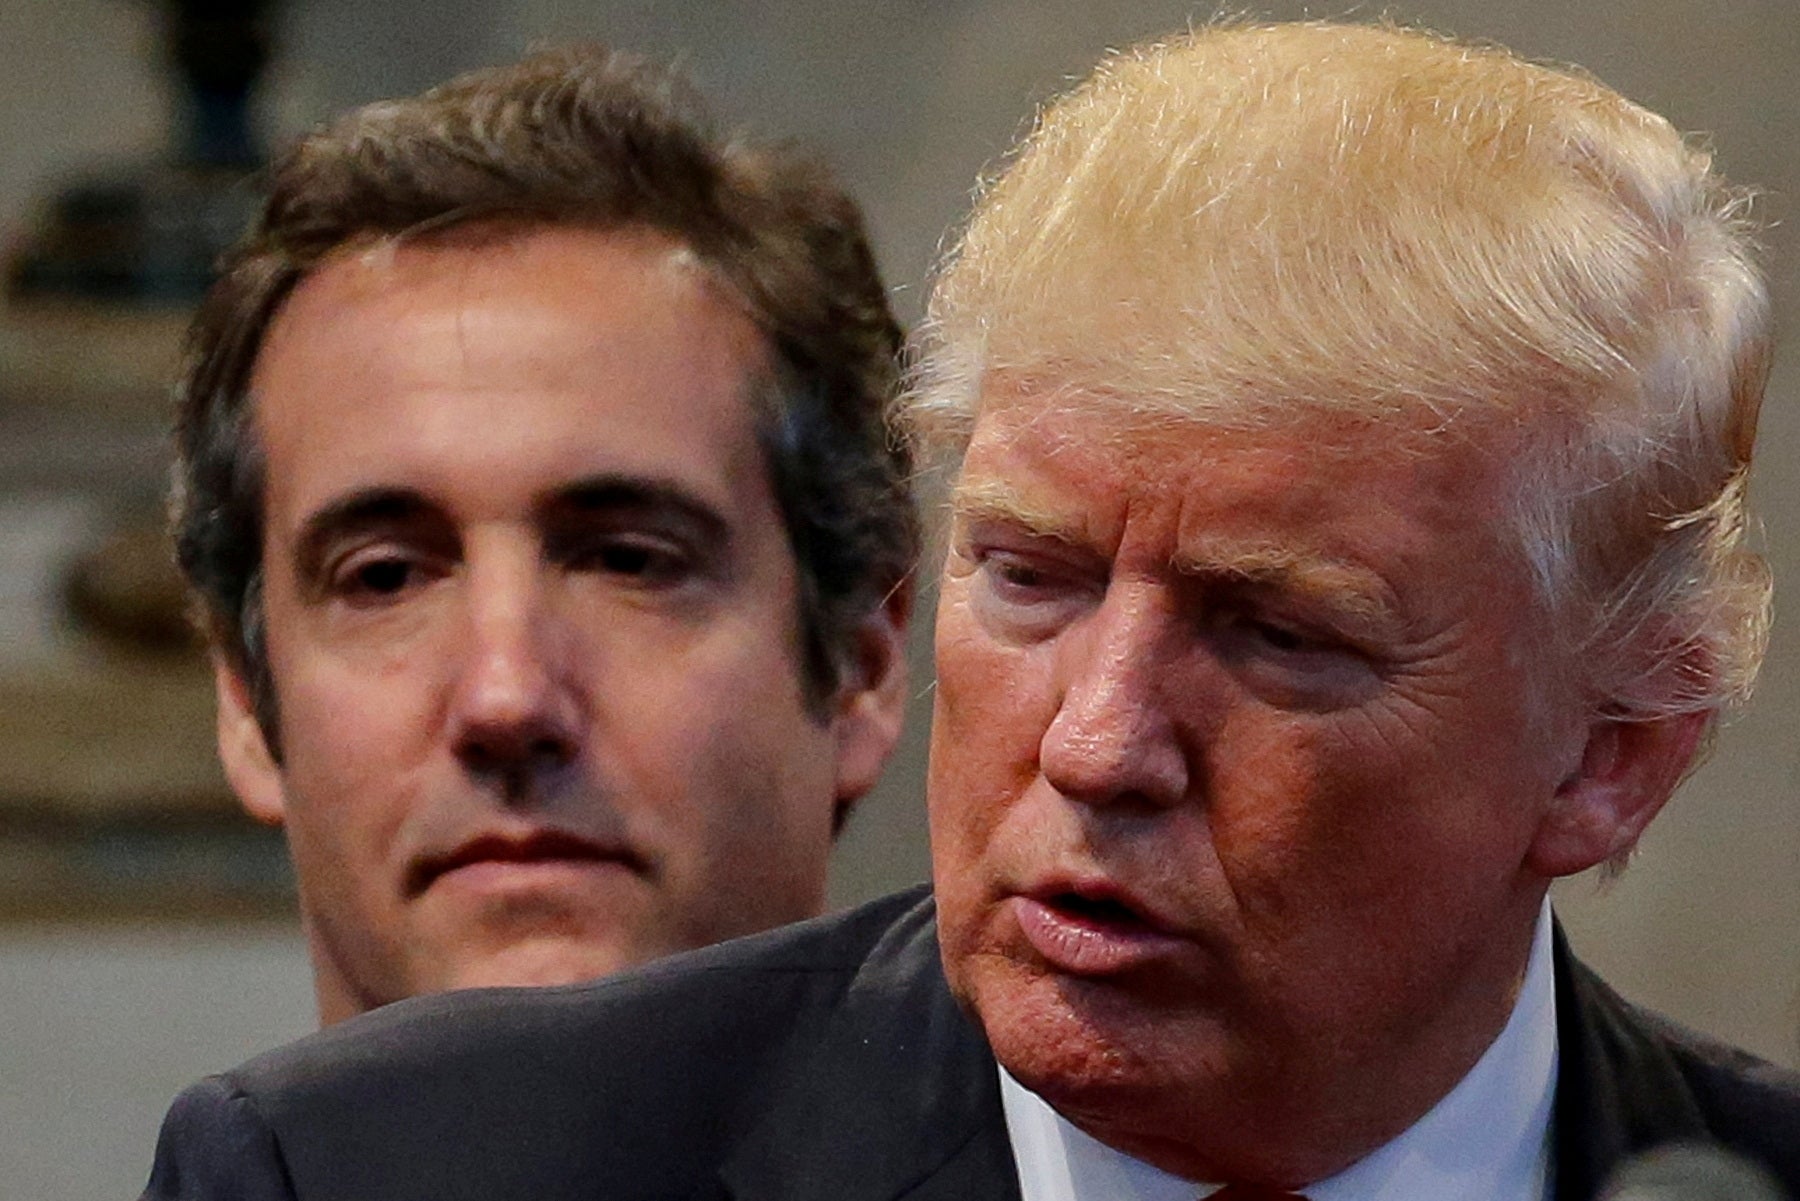 Donald Trump's personal attorney Michael Cohen stands behind Trump as he runs for president in 2016